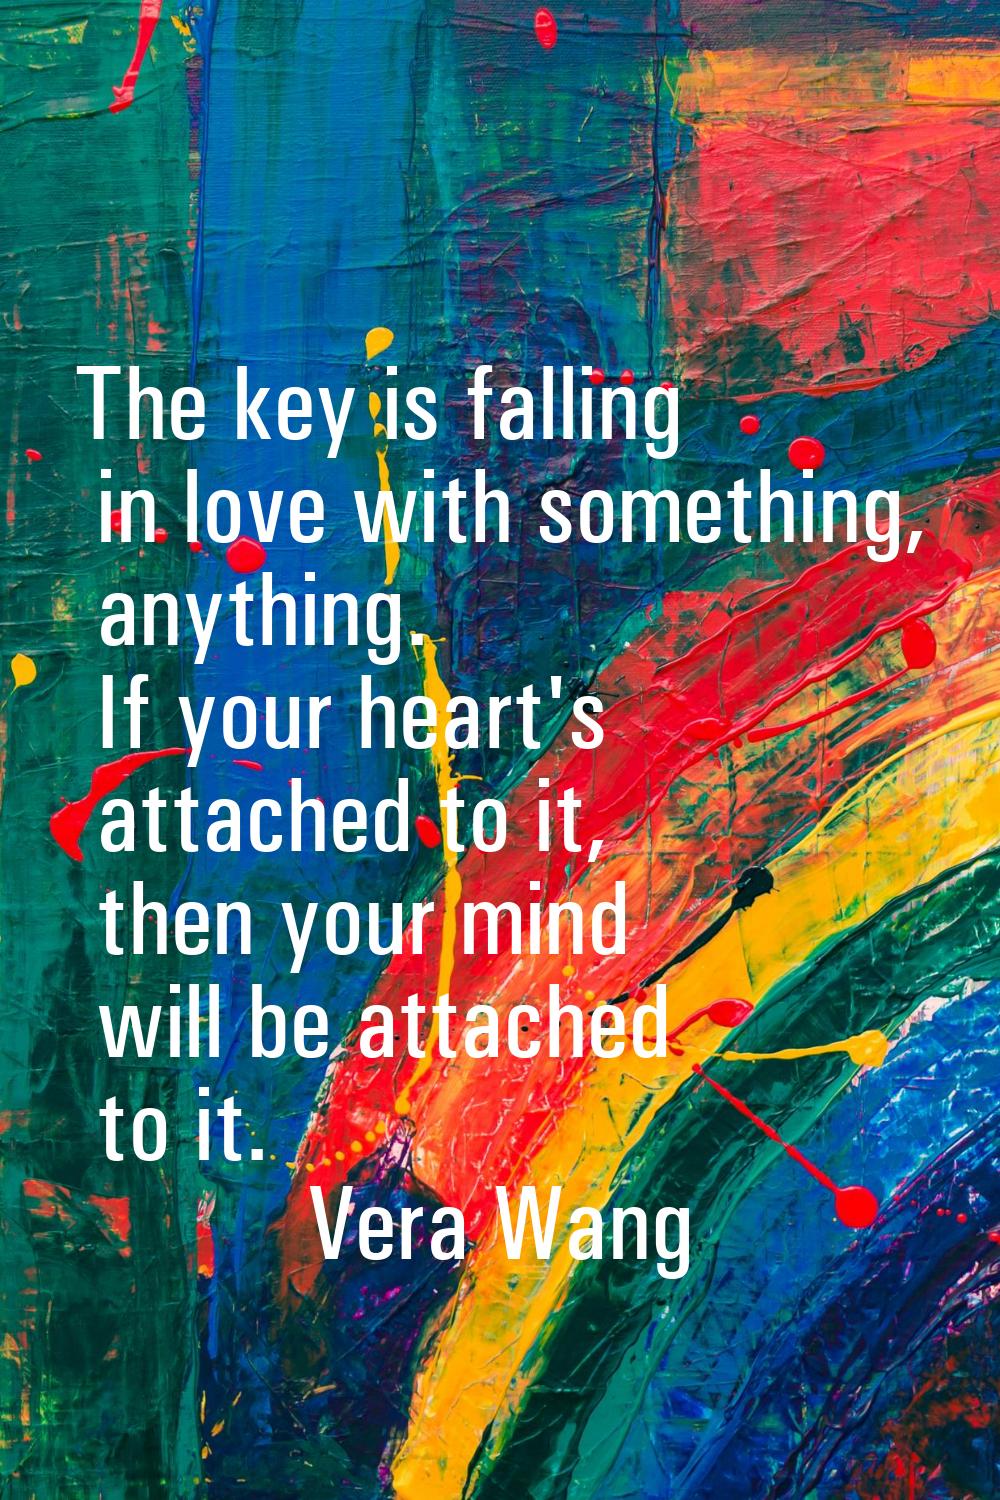 The key is falling in love with something, anything. If your heart's attached to it, then your mind